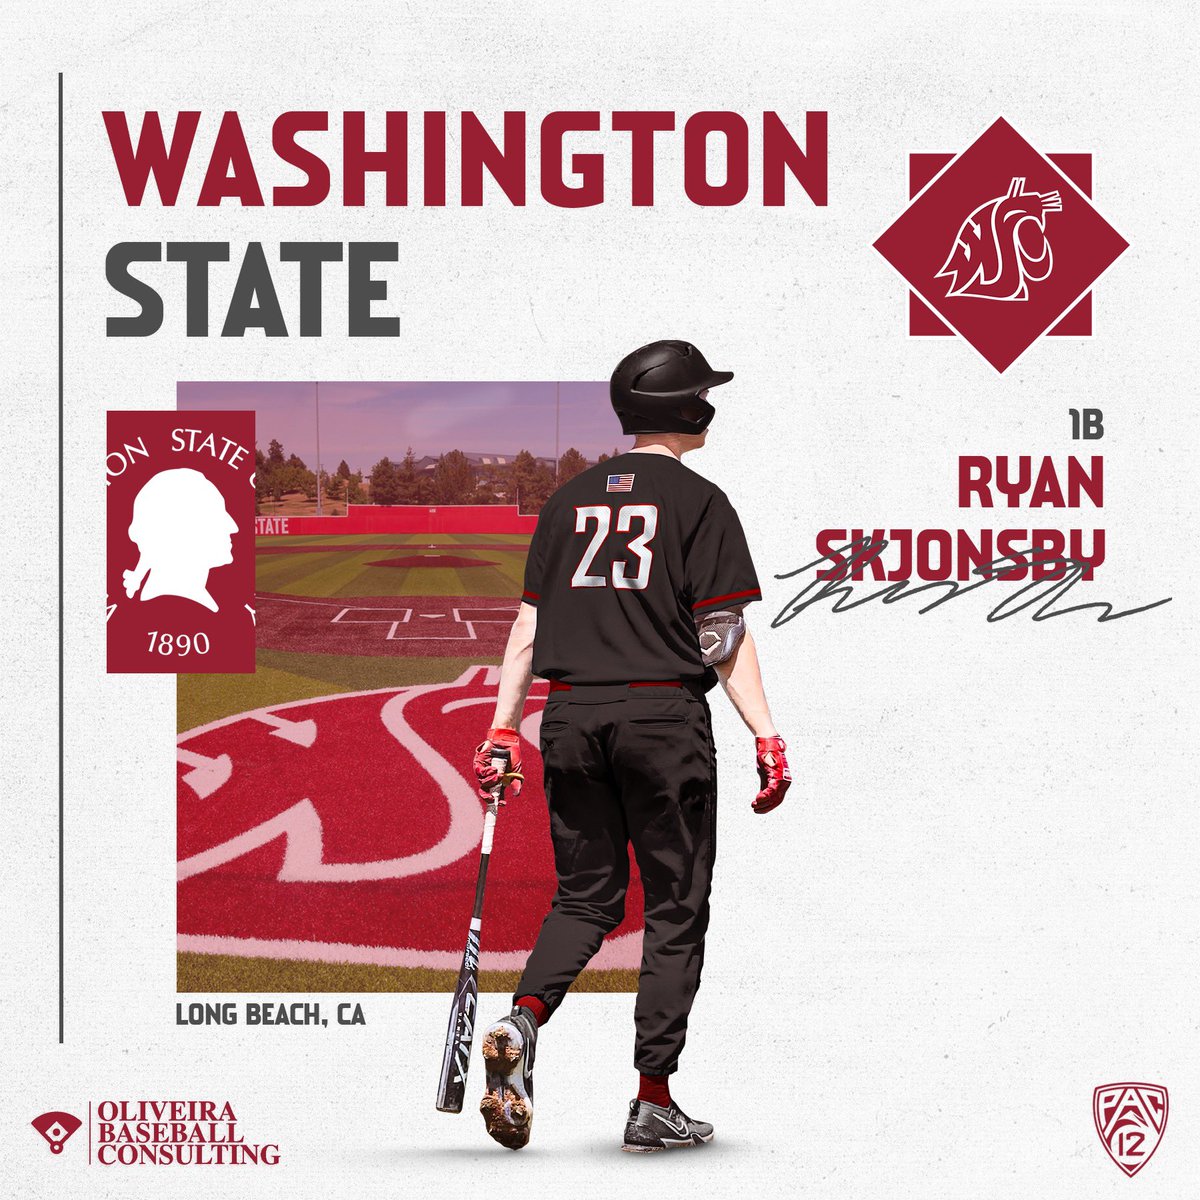 Congrats to Ryan Skjonsby on his commitment to Washington State University. The Cougars with a middle of the order bat heading to Pullman. Excited for the Skjonsby's! #Wazzu #GoCougs #Pac12 #Committed #OBC